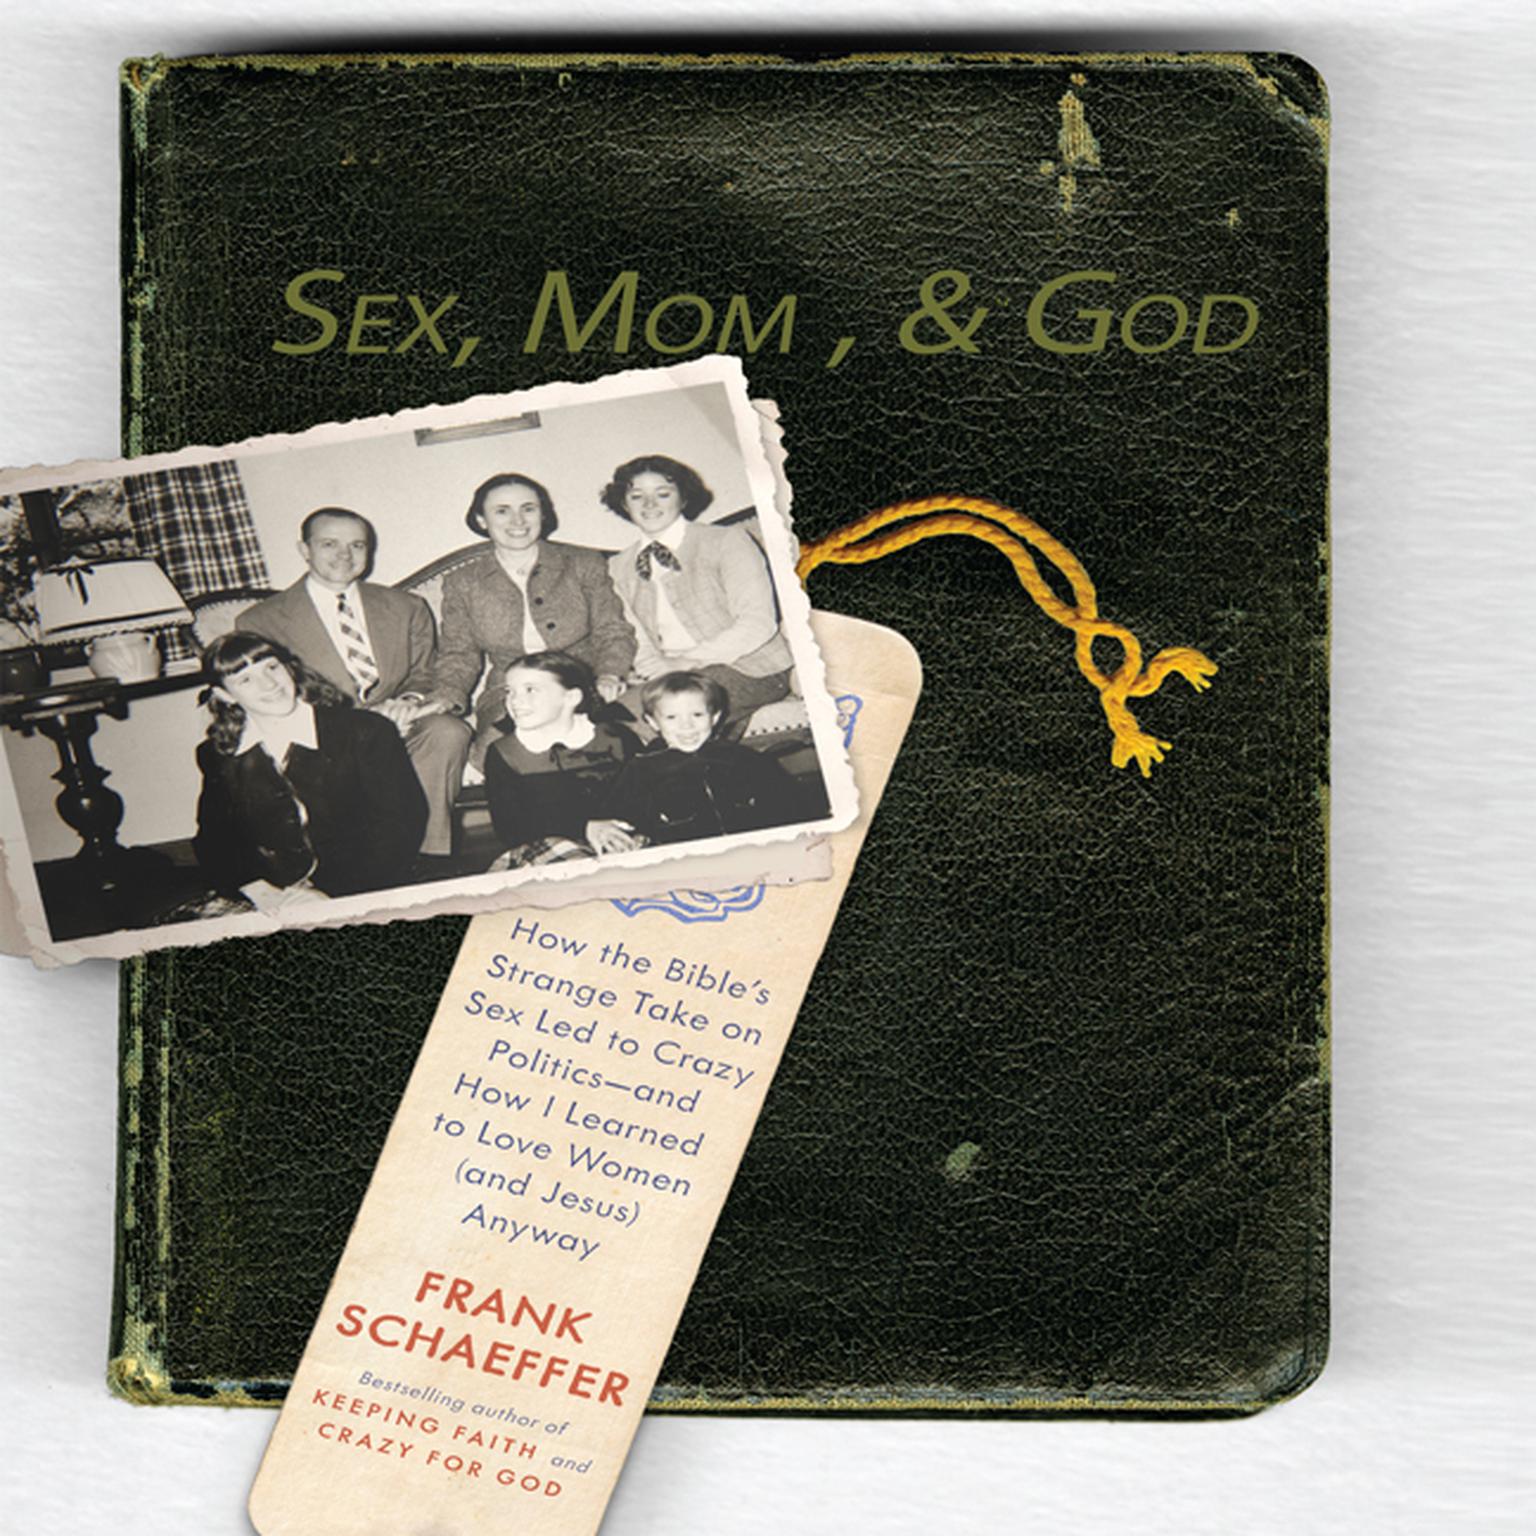 Sex, Mom, and God: A Religiously Obsessed Sexual Memoir (or a Sexually Obsessed Religious Memoir) Audiobook, by Frank Schaeffer